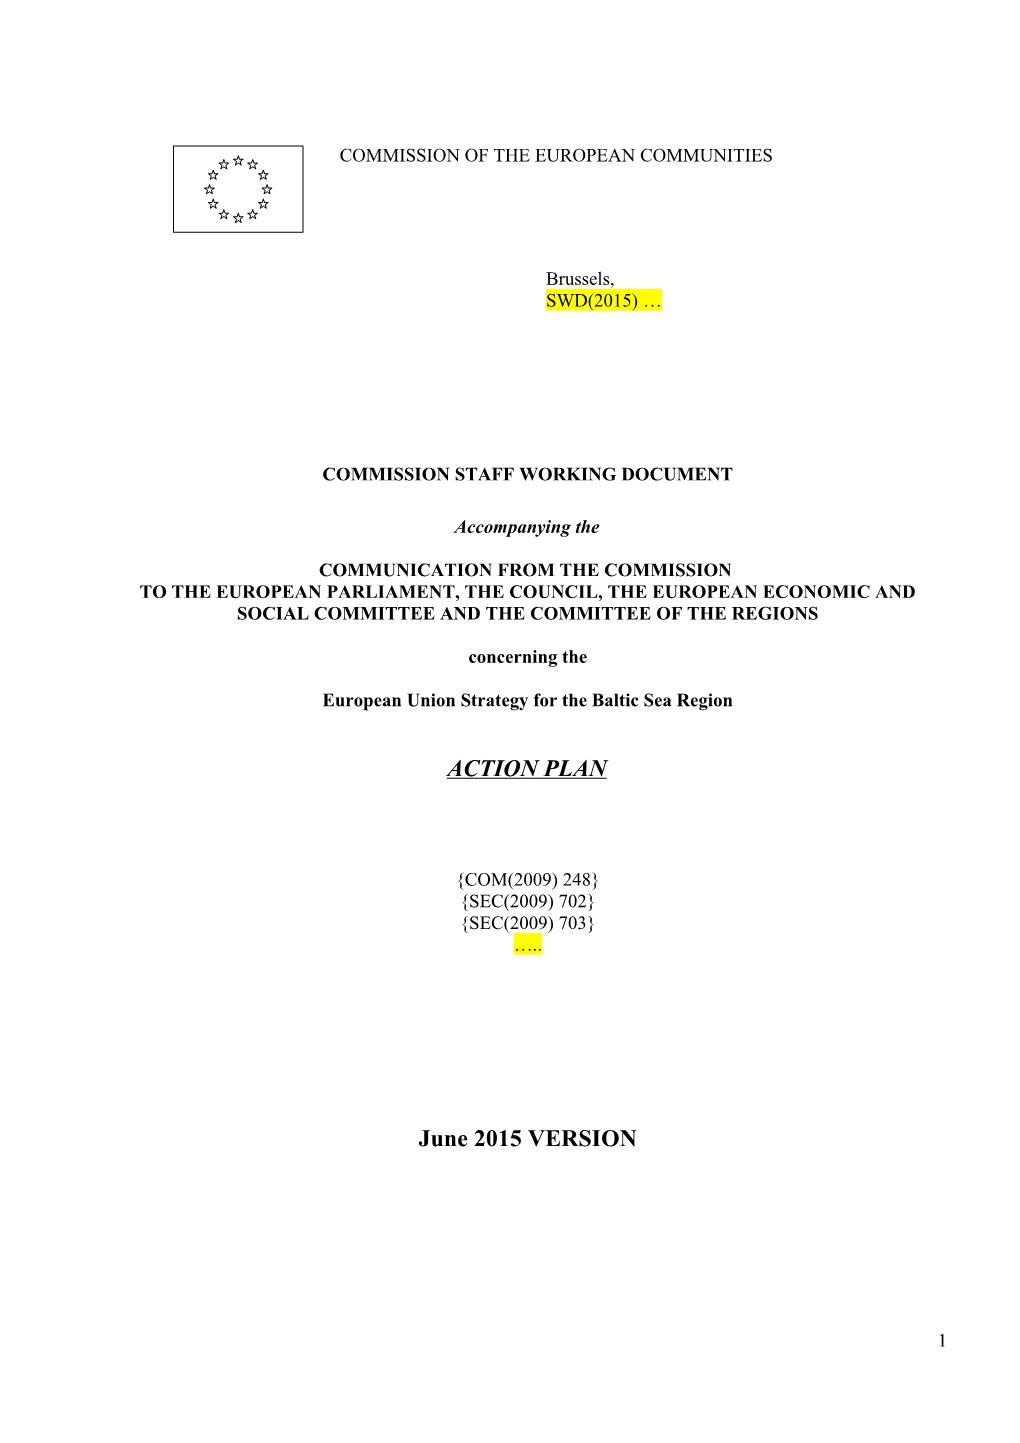 The Action Plan Is Dated 19 June 2009